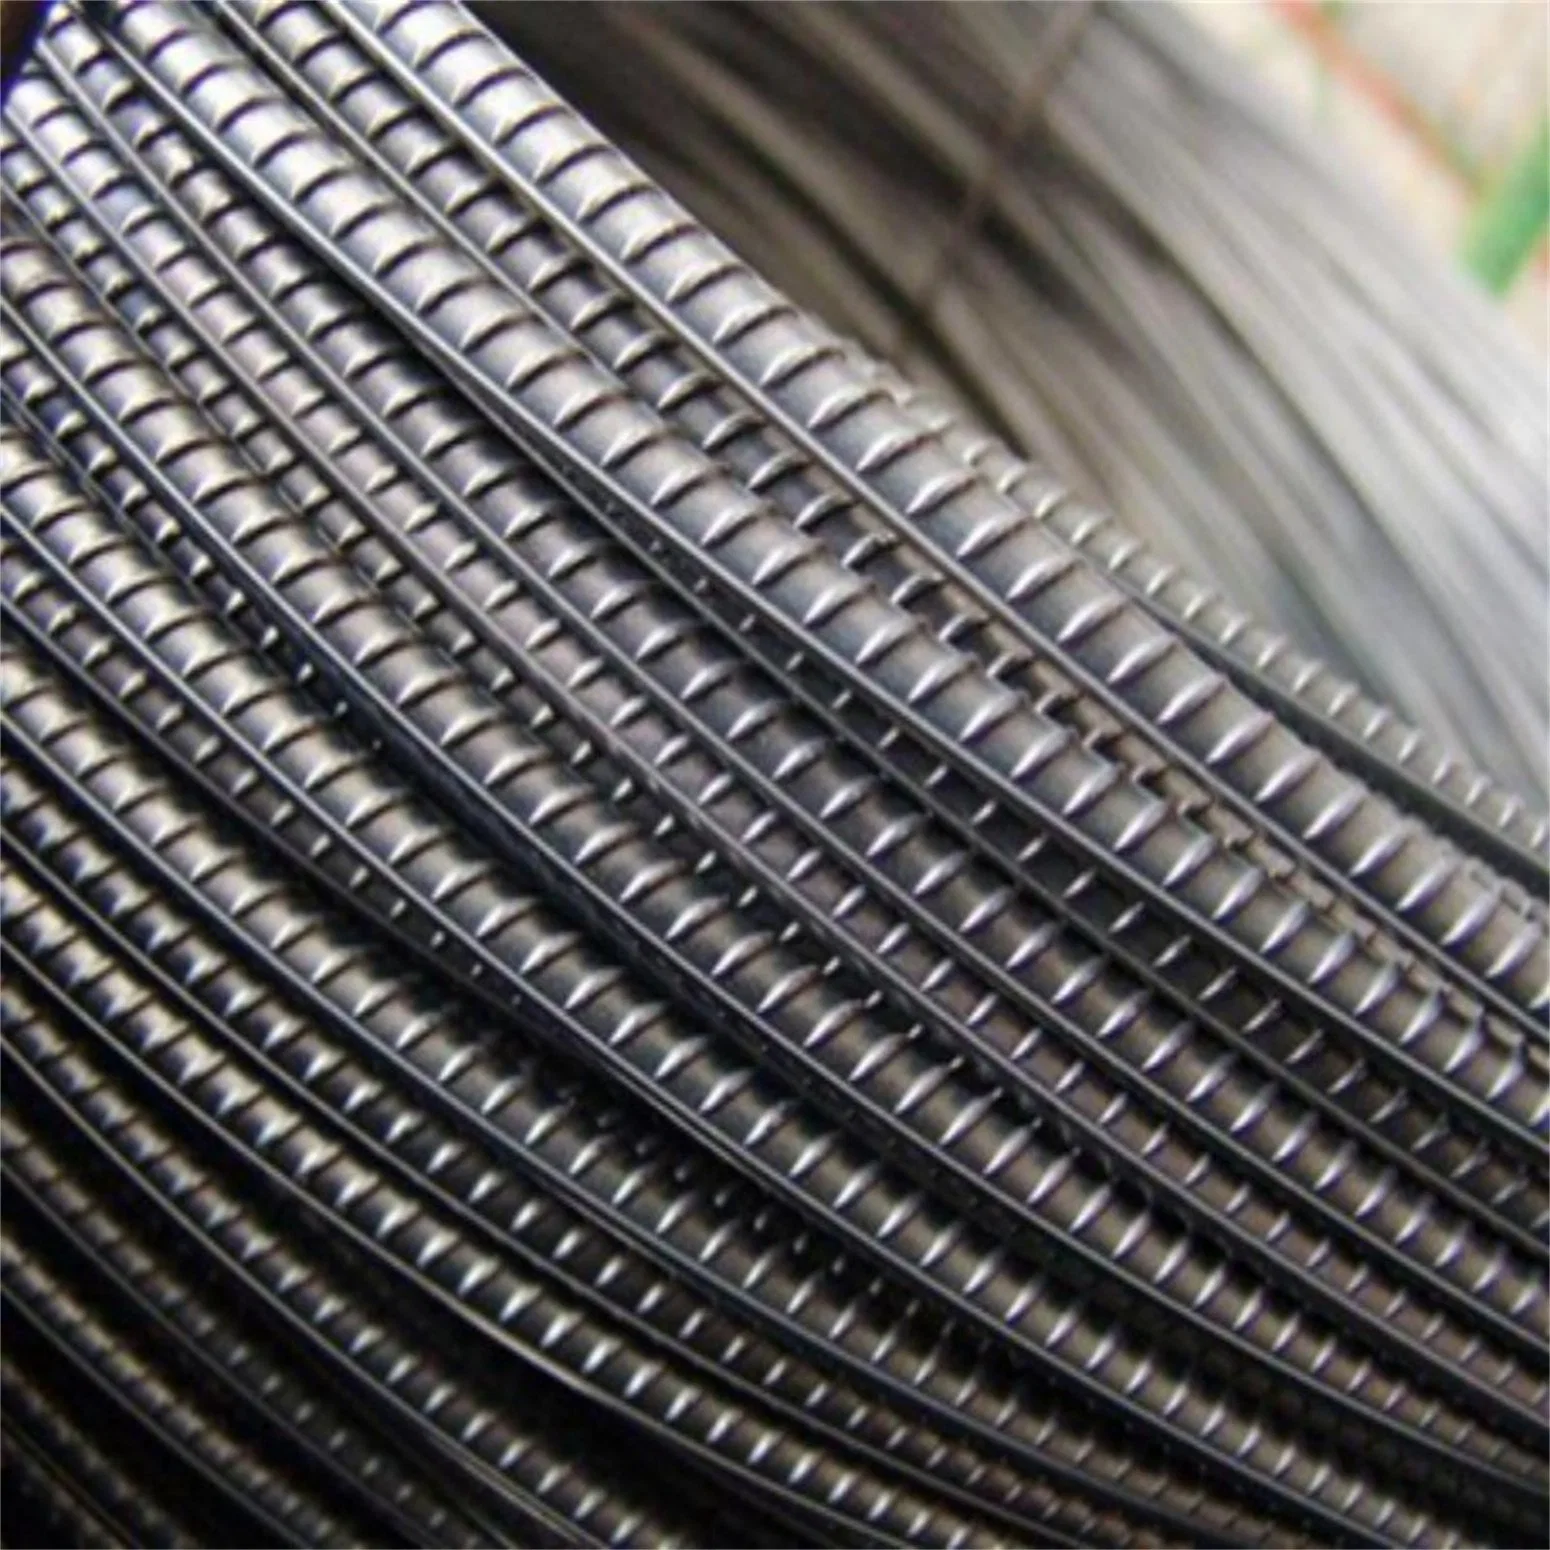 Prime Quality Rebar Screw Thread Steel Coil/Strip/Wire Manufacture Structural Steel Bar Alloy Building Material Iron Metal Wire Rebar Rod